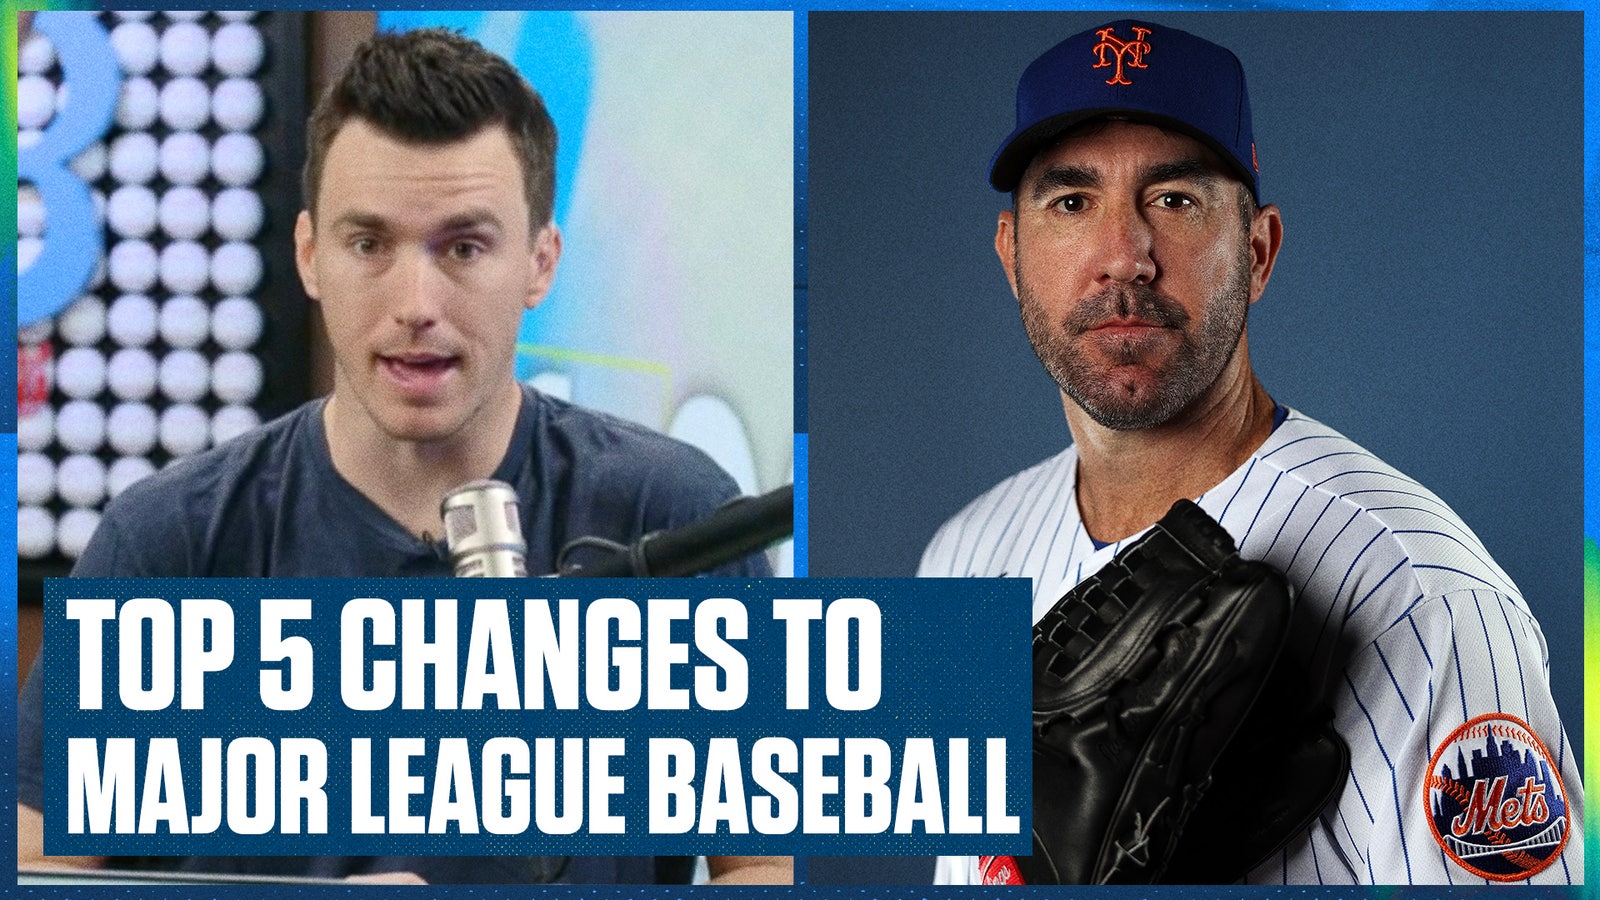 Top 5 changes Ben Verlander would like to see